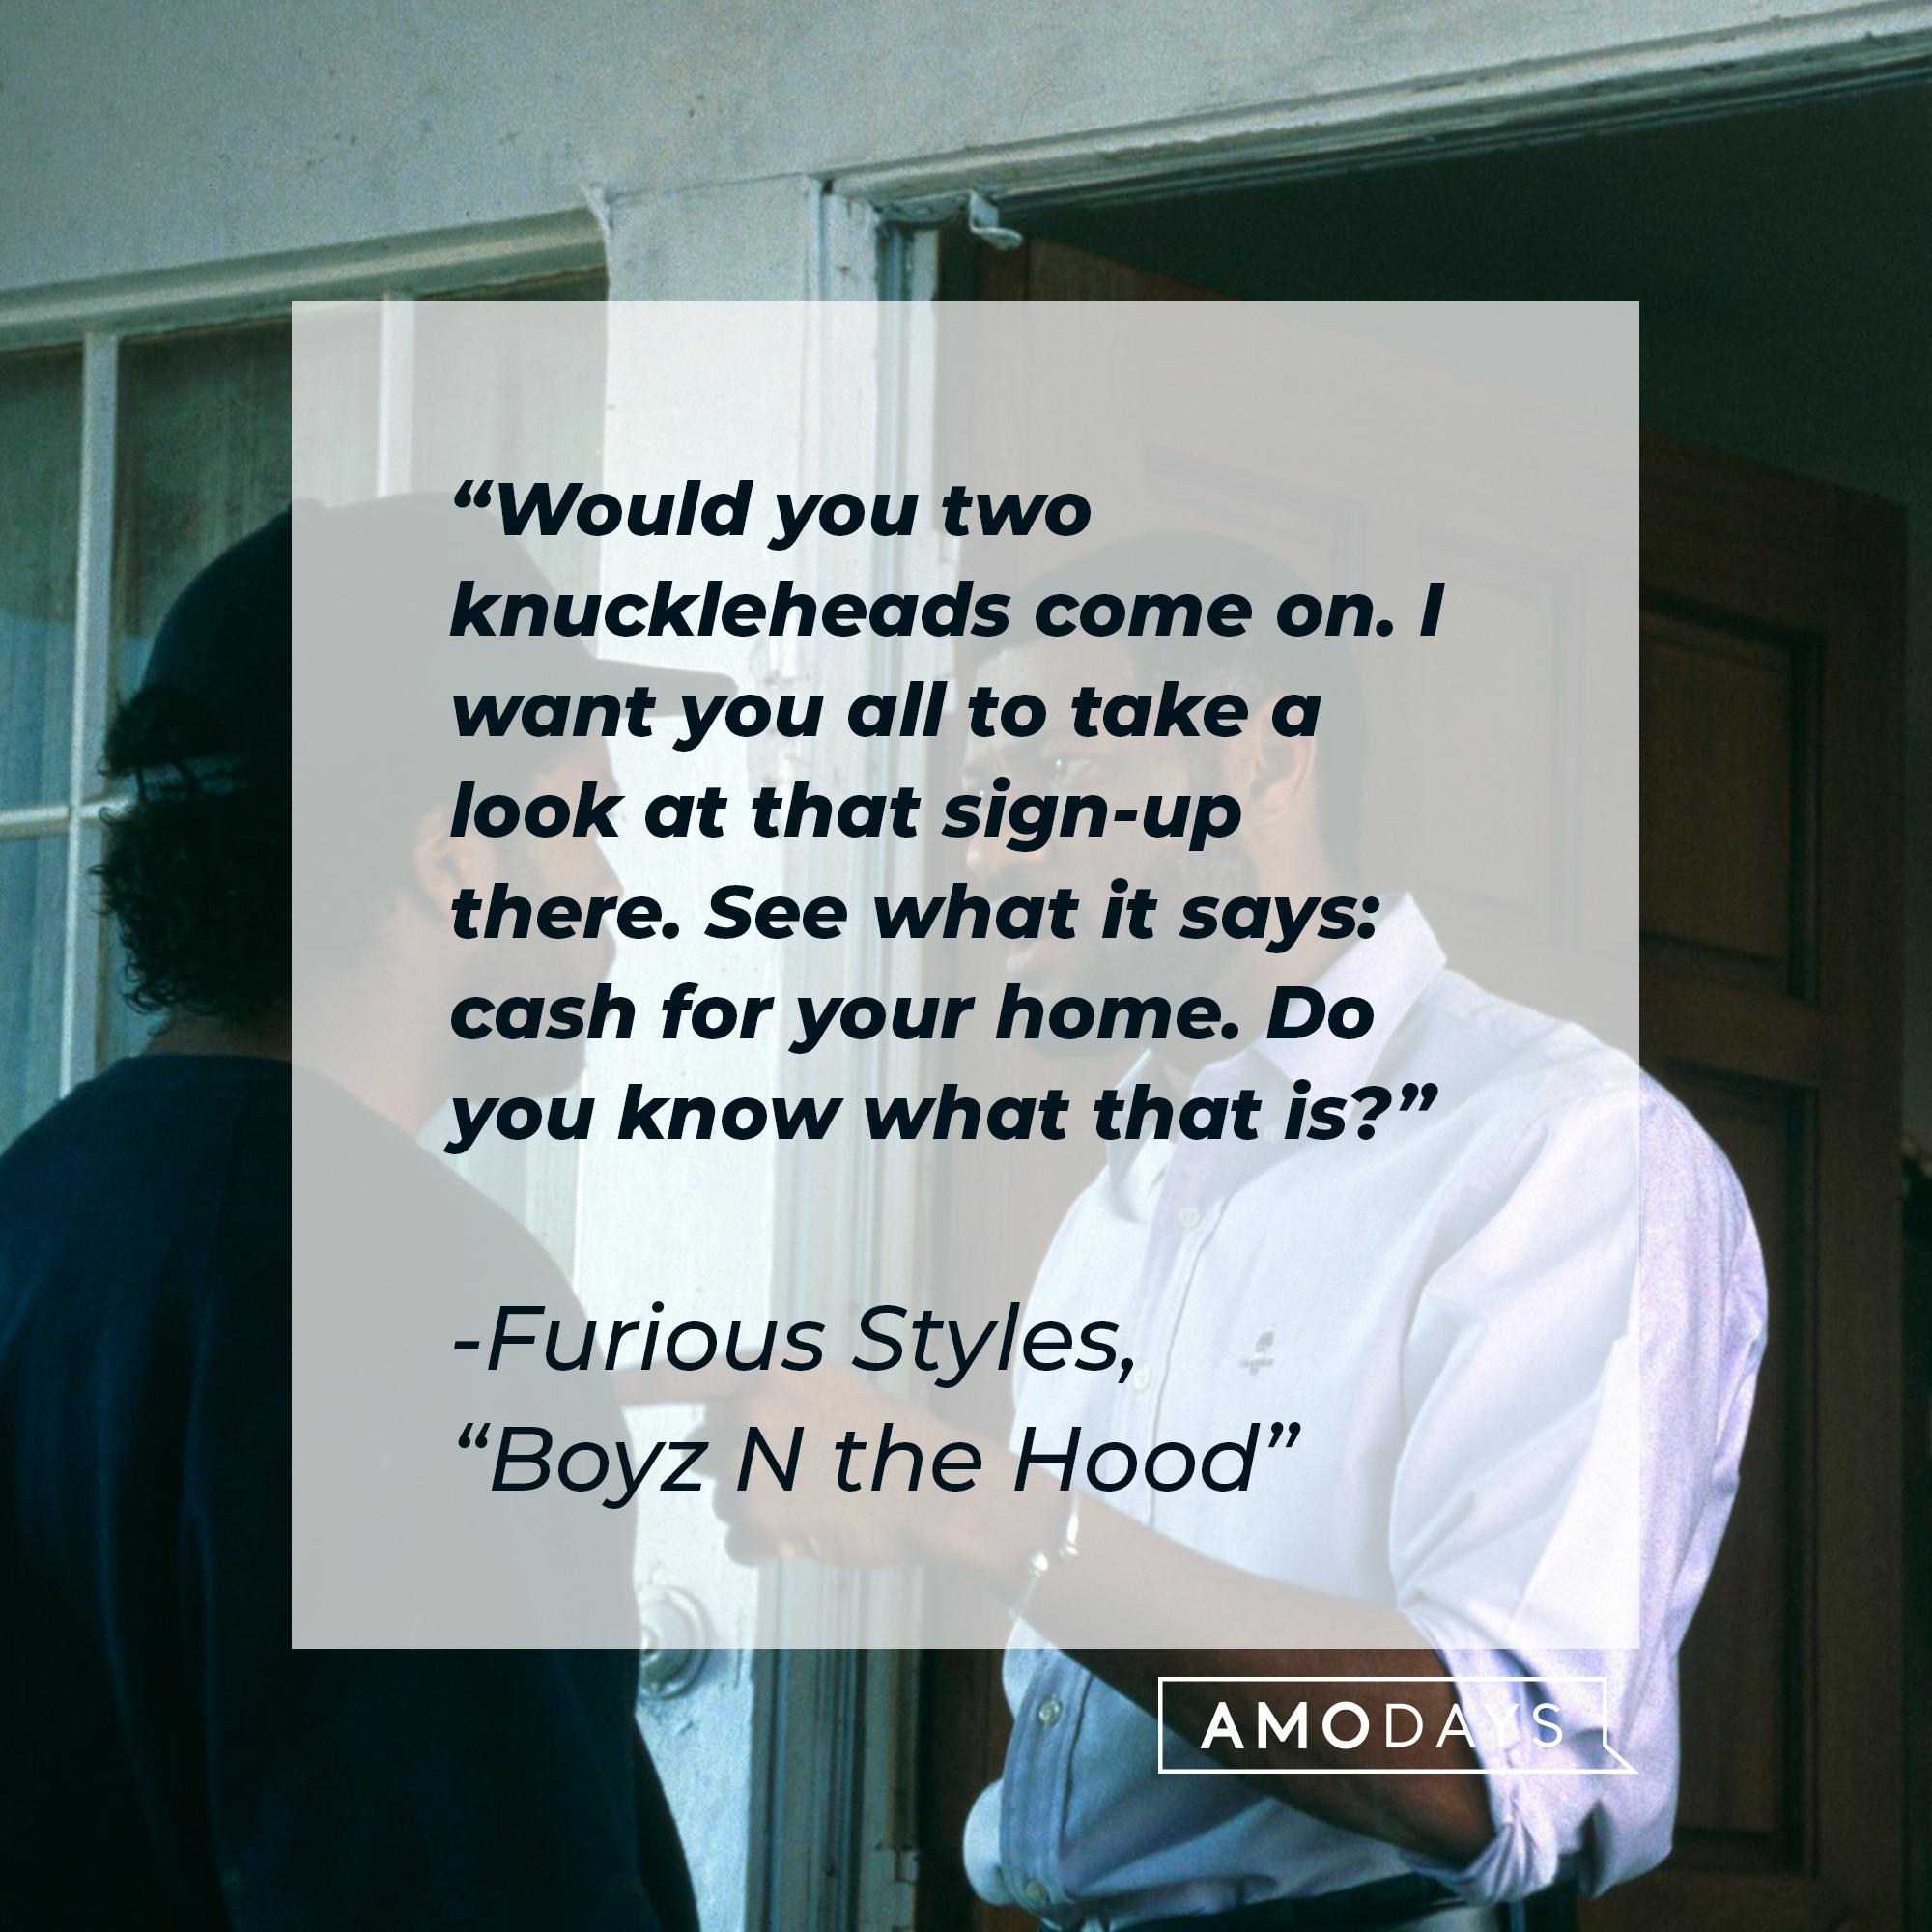 Furious Style's quote in "Boyz N the Hood:" "Would you two knuckleheads come on. I want you all to take a look at that sign-up there. See what it says: cash for your home. Do you know what that is?" | Source: Facebook.com/BoyzNtheHood